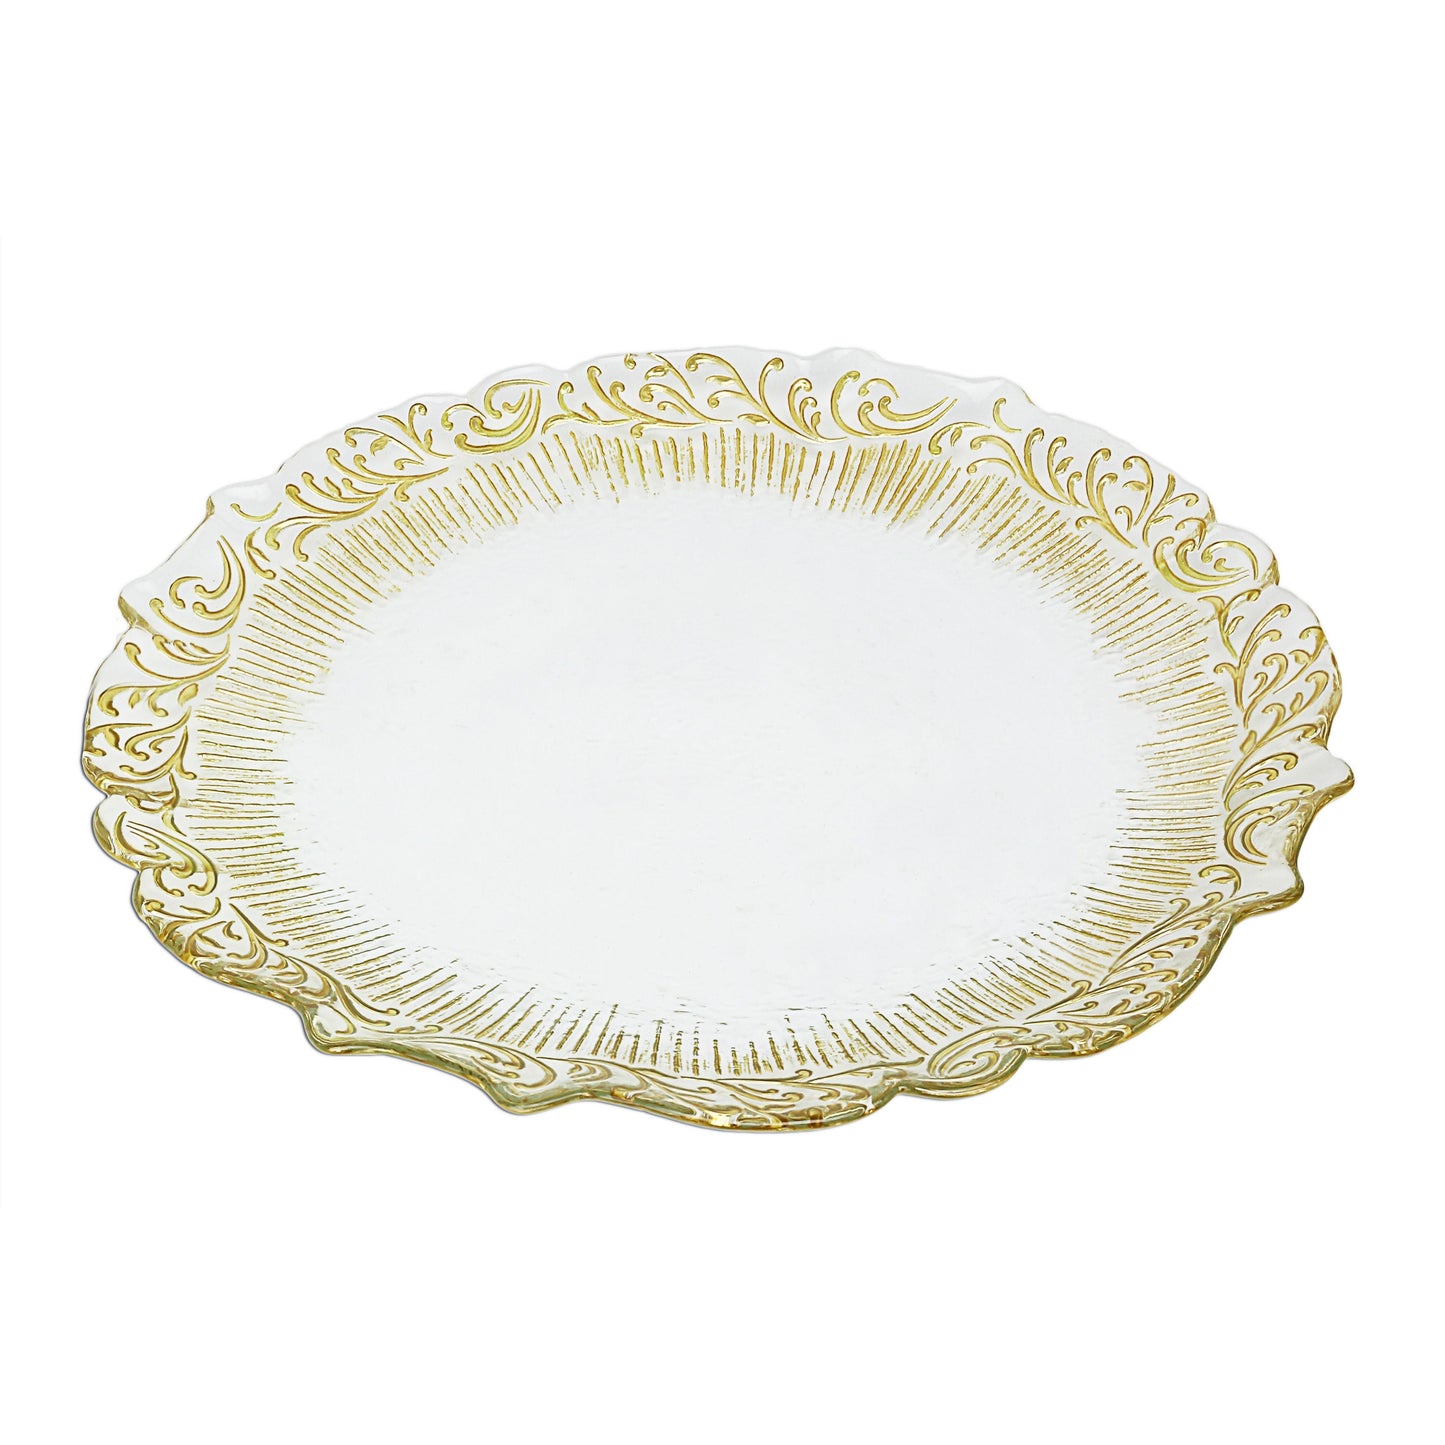 Classic Touch Decor Set Of 4 Plates With Lacey Gold Design, 8"